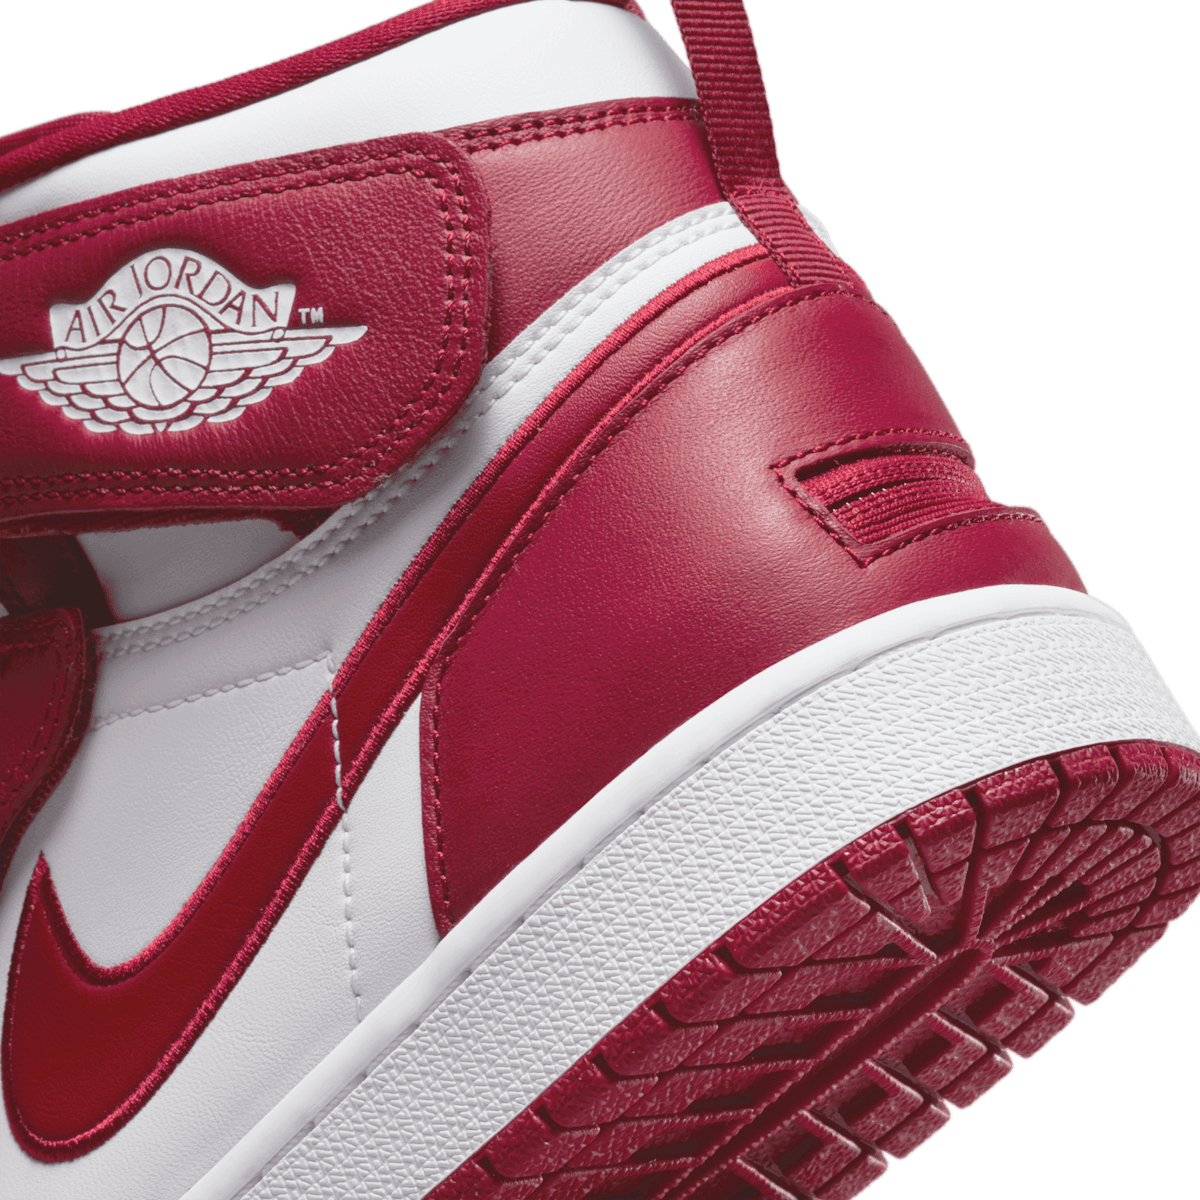 Jordan 1 Flyease Red and White Angle 5